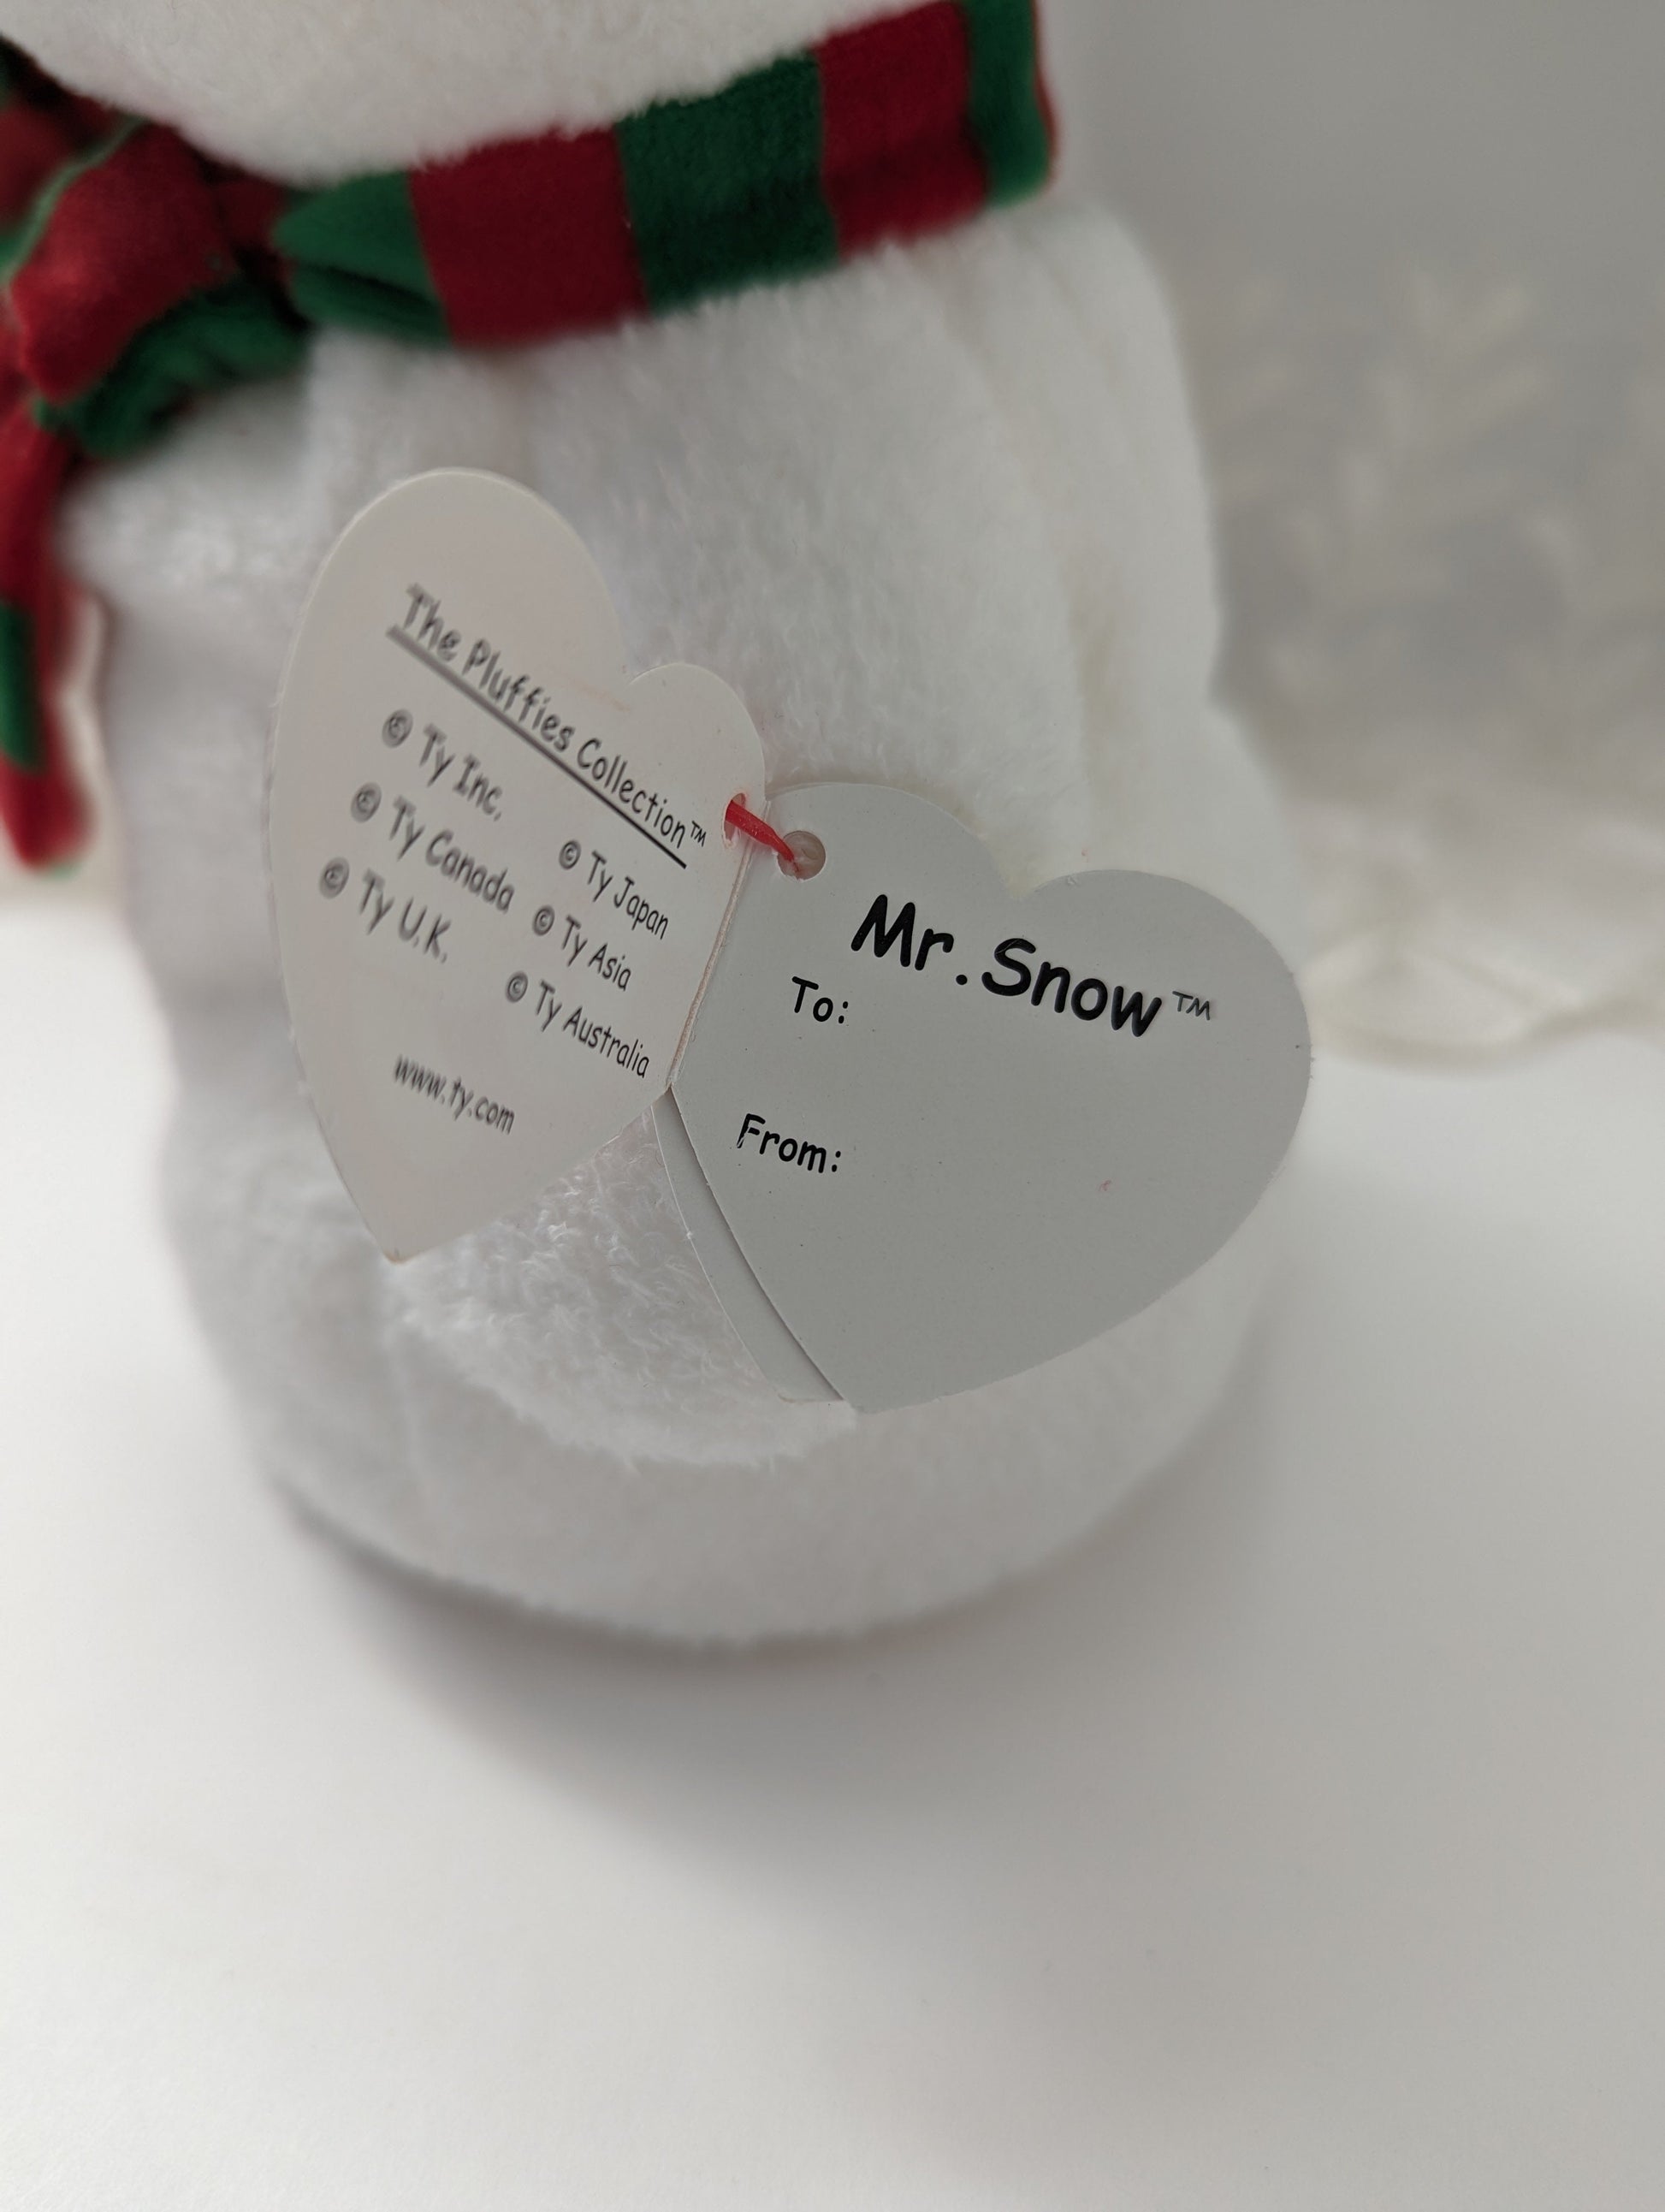 Ty Pluffies - Mr Snow The Snowman (10in) - Vintage Beanies Canada